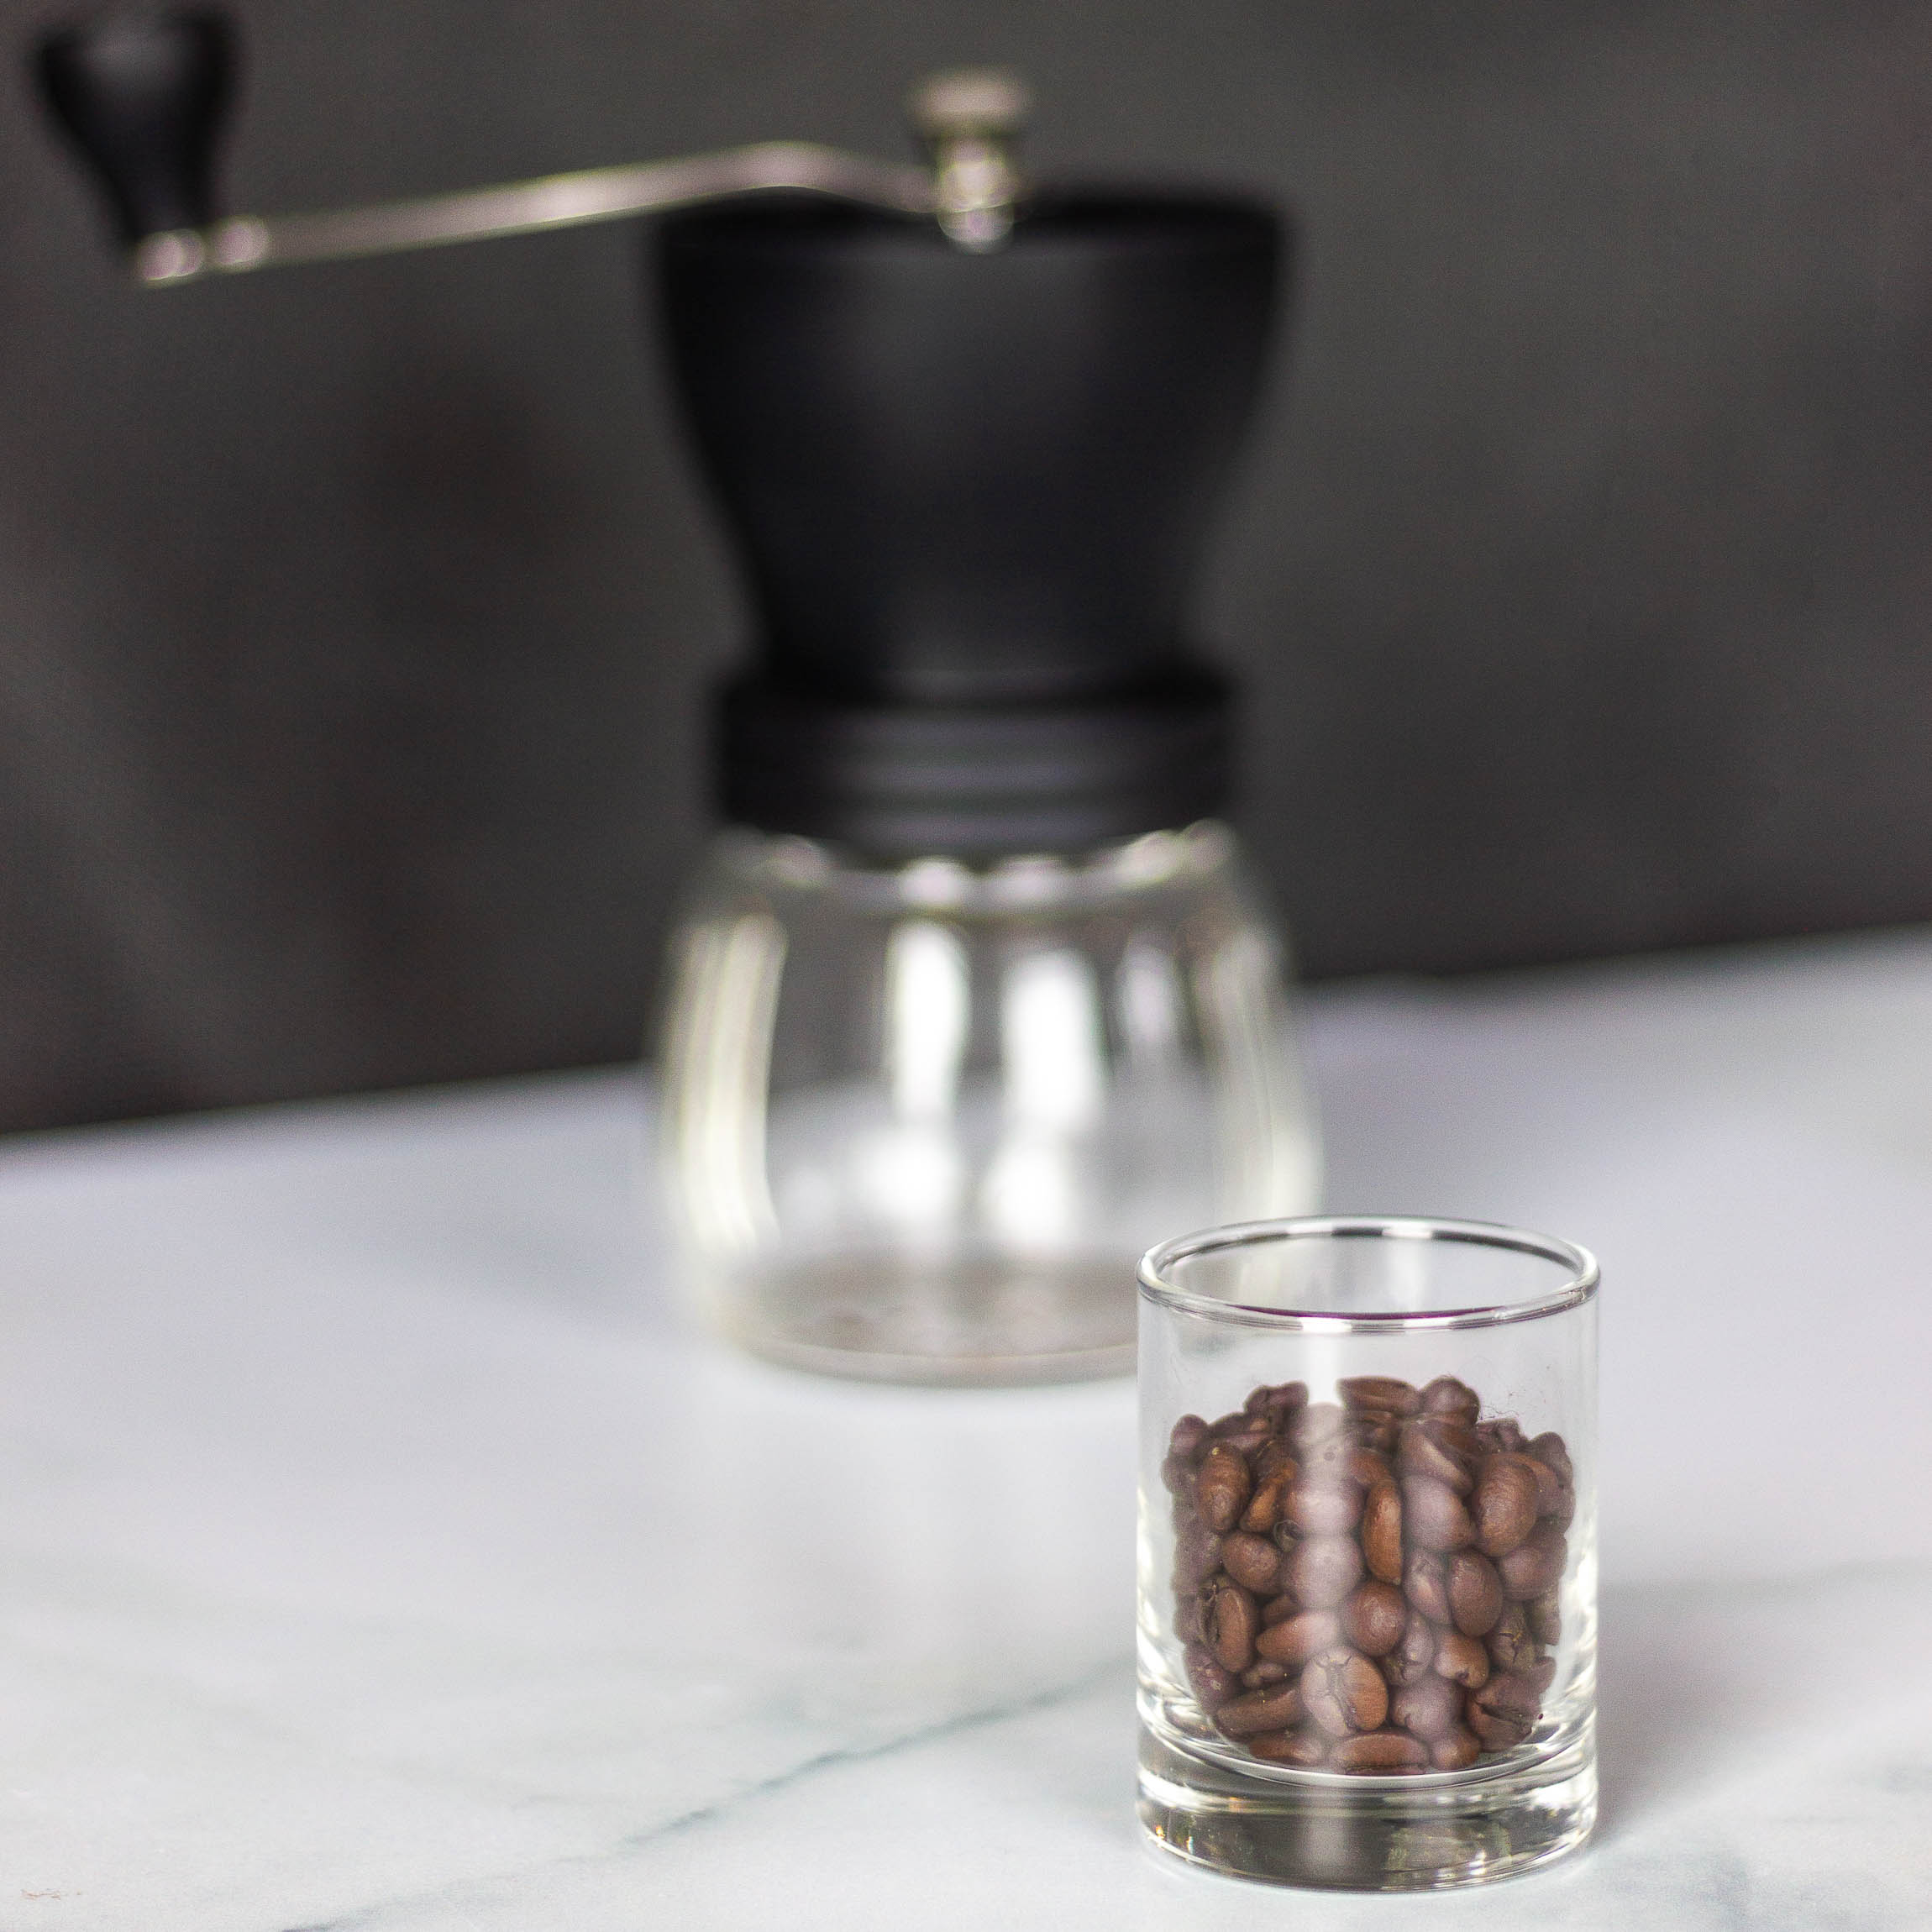 Grind coffee beans with a manual grinder